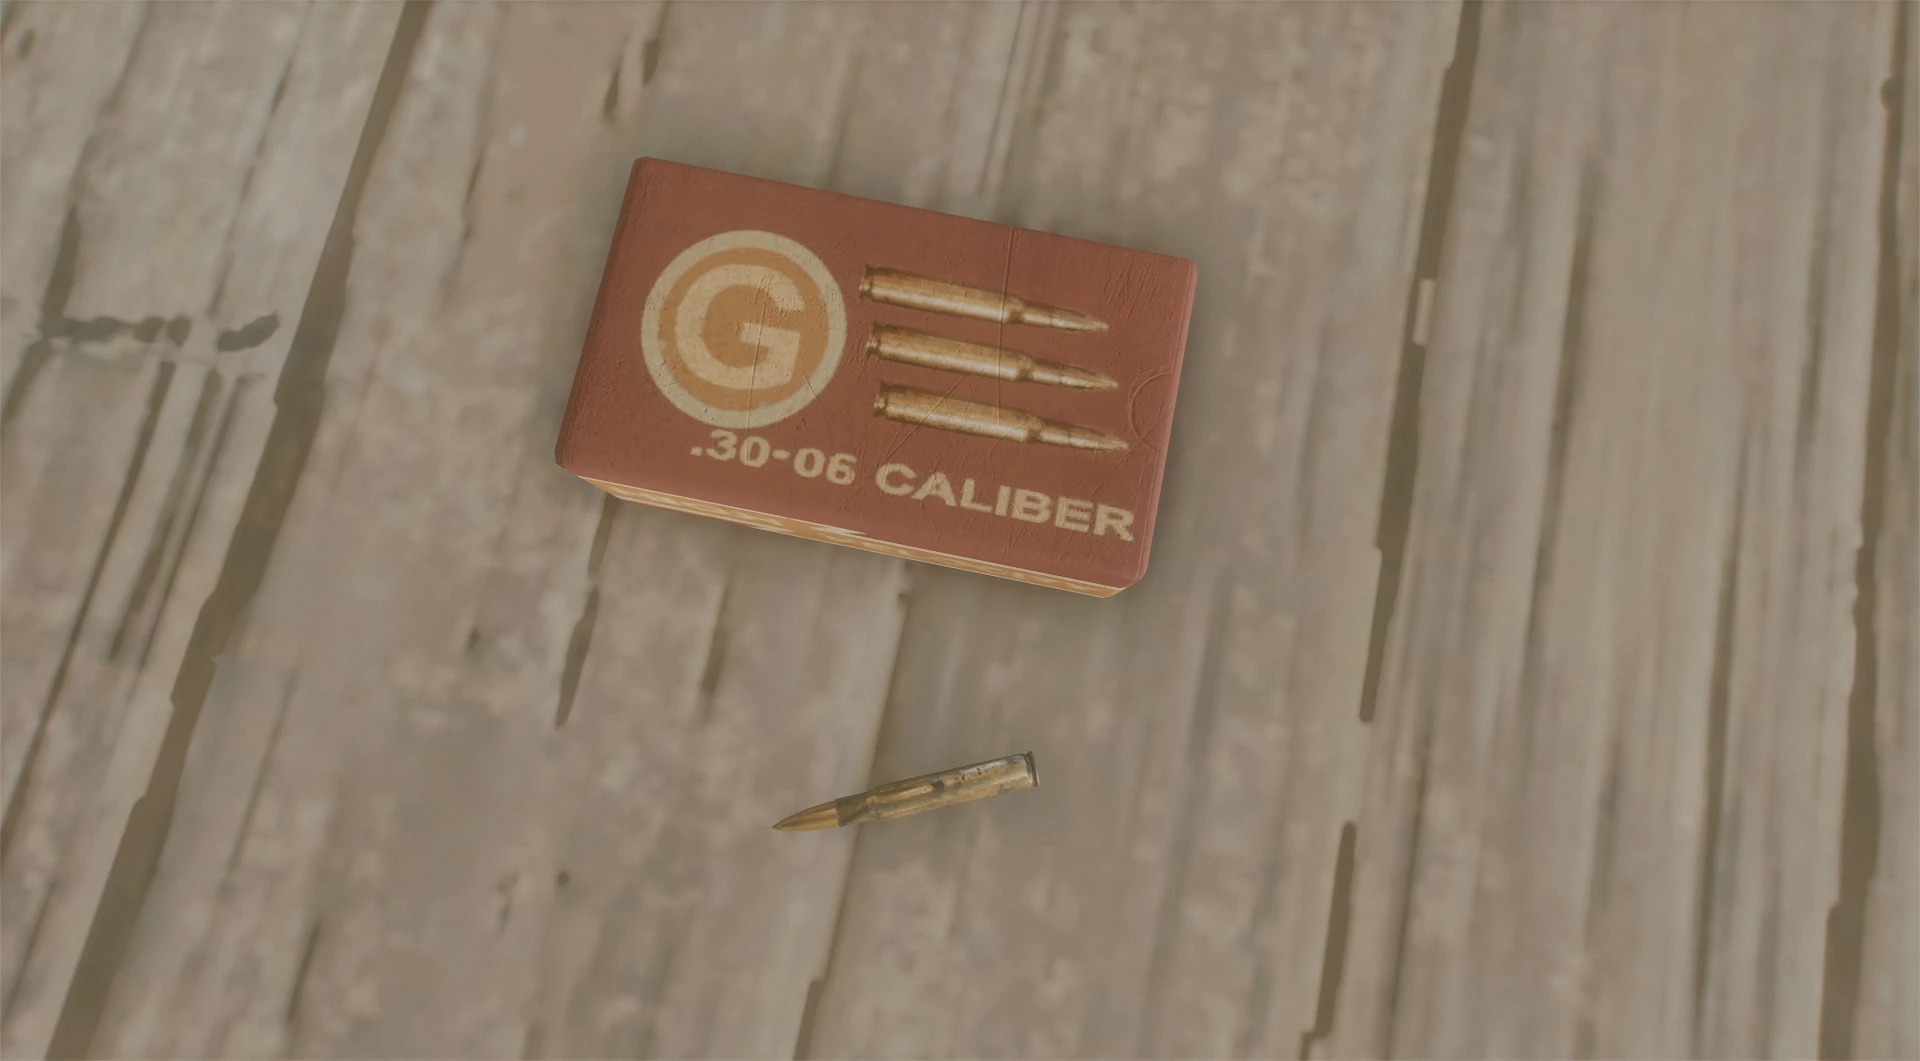 where to find ammo fallout 4